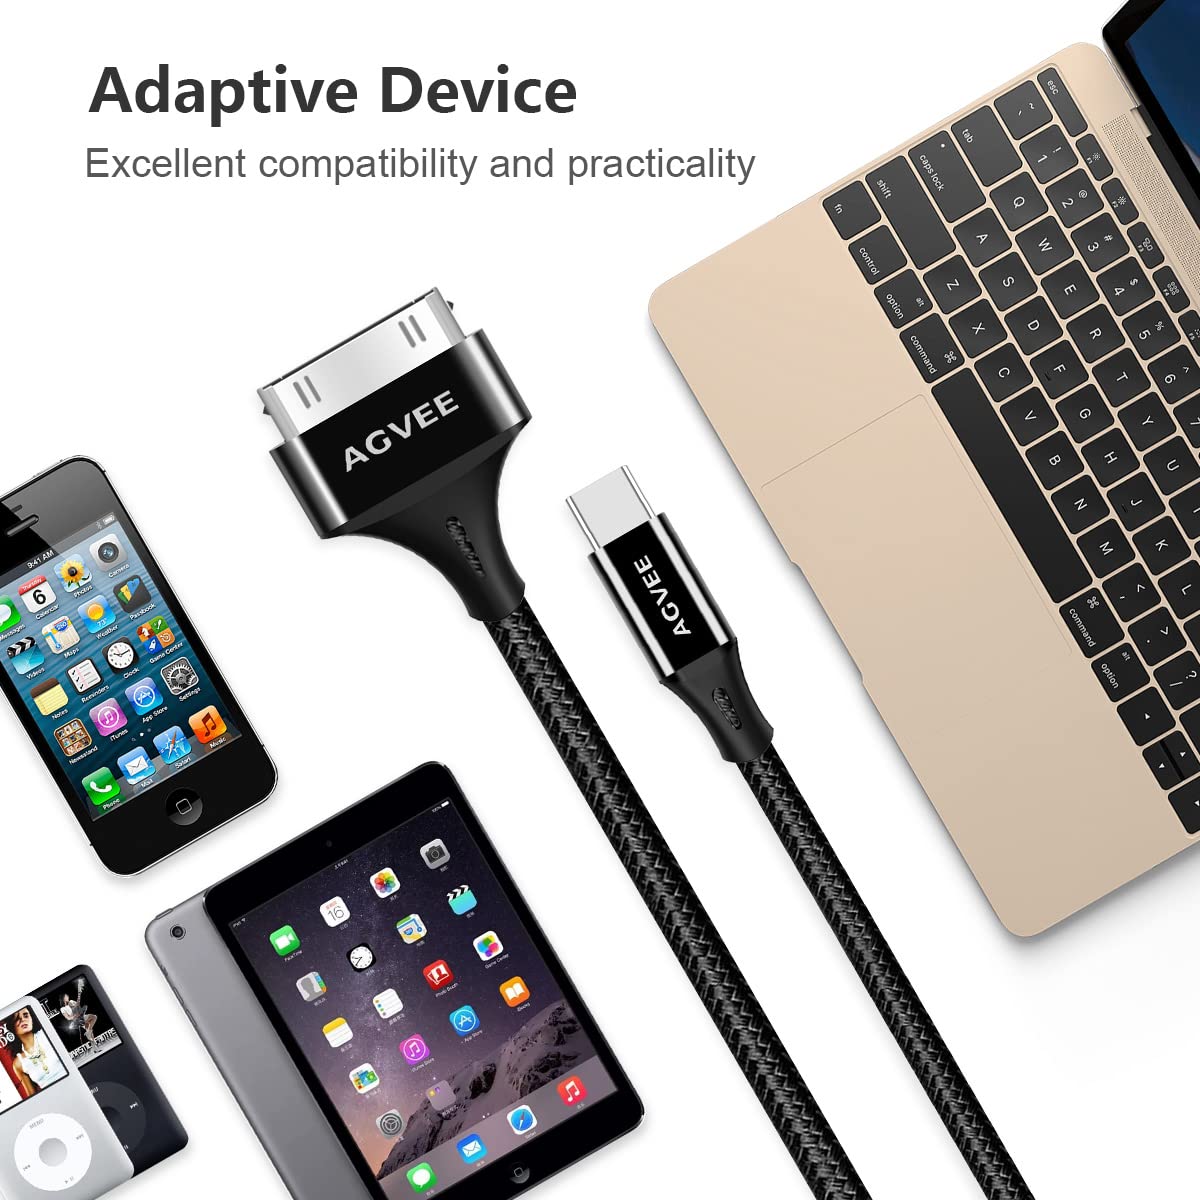 AGVEE 2 Pack 6ft USB-C to 30 Pin Cable for Old iPhone 4/4S iPad 1/2/3 iPod, Braided Metal Shell Type-C to 30Pin Adapter Charging Charger Data Cord, Black